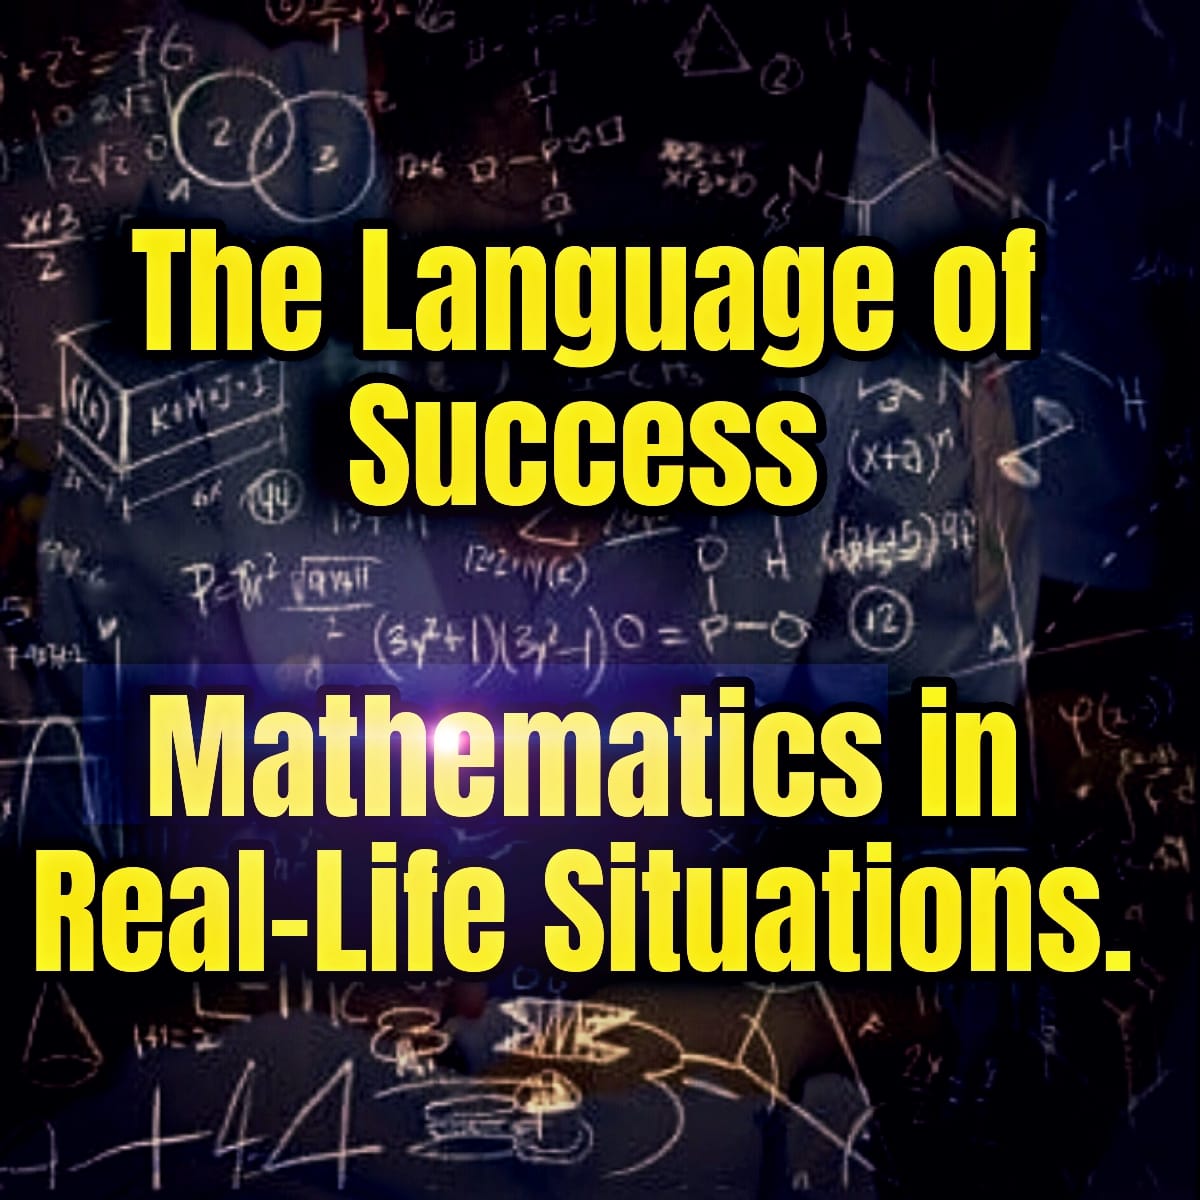 Mathematics in real-life situations.